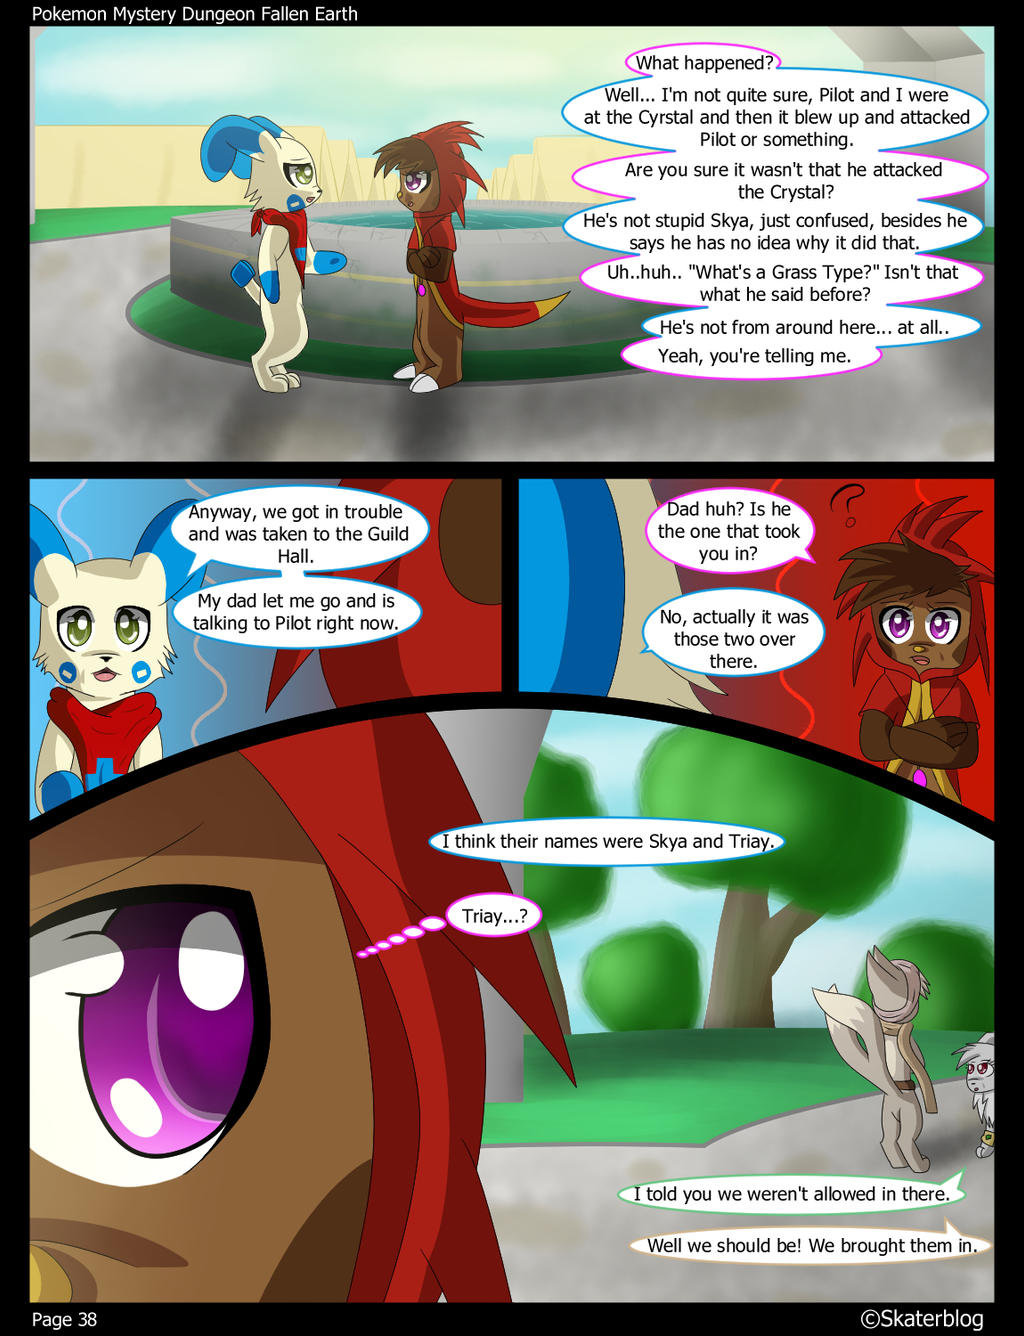 PMD Fallen Earth | Ch. 2 Page 17